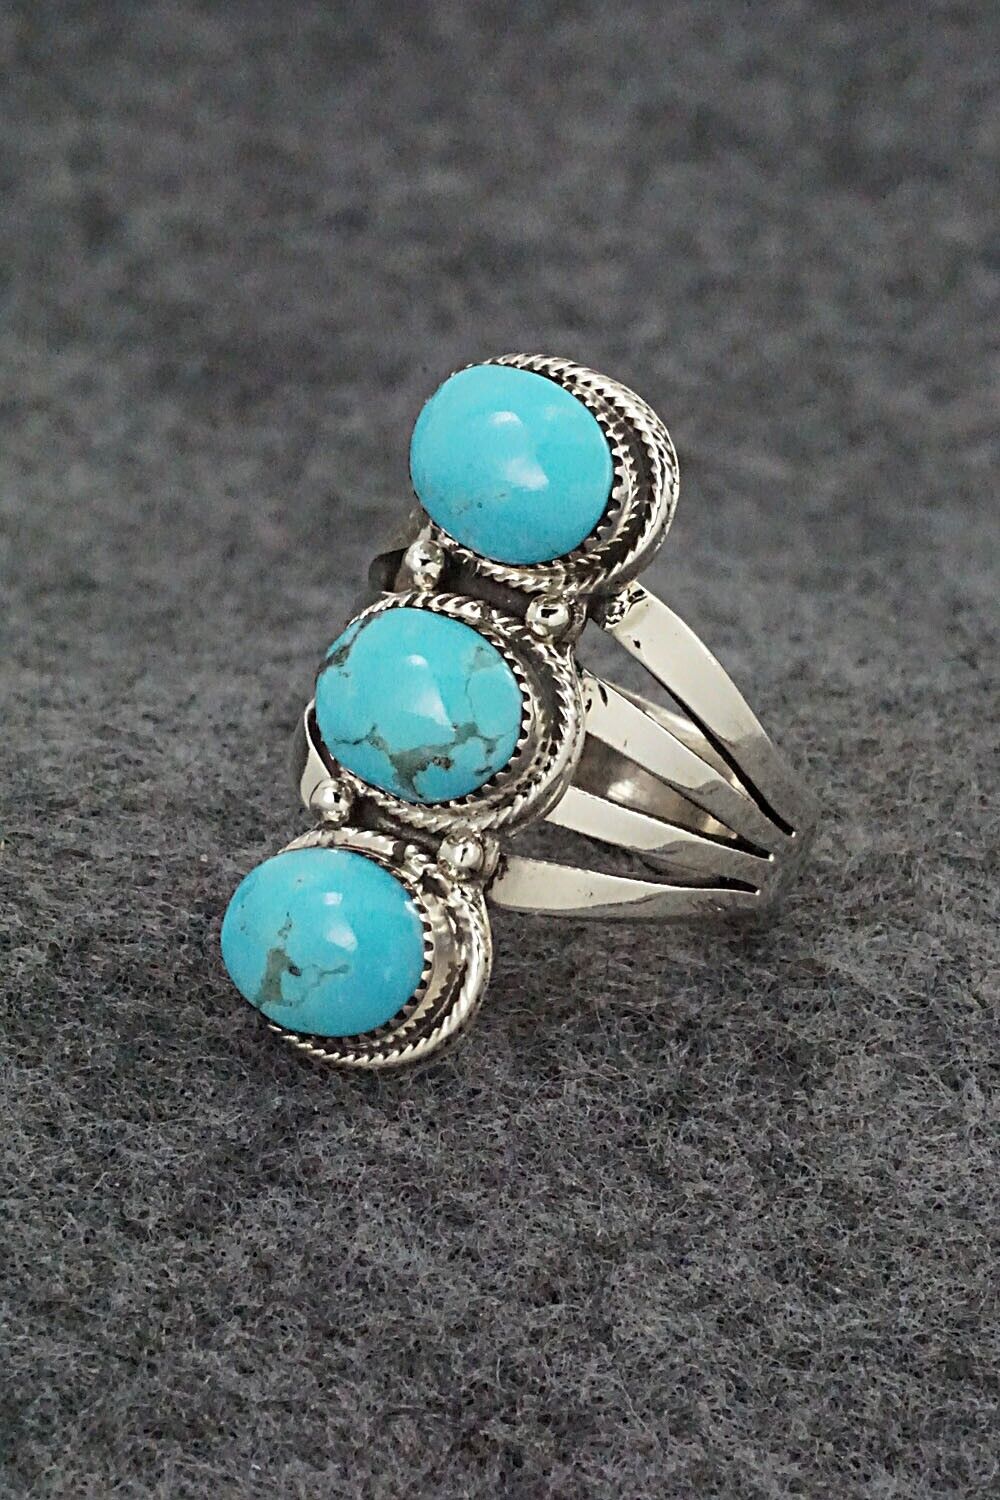 Turquoise & Sterling Silver Ring - Sheena Jack - Size 7.75